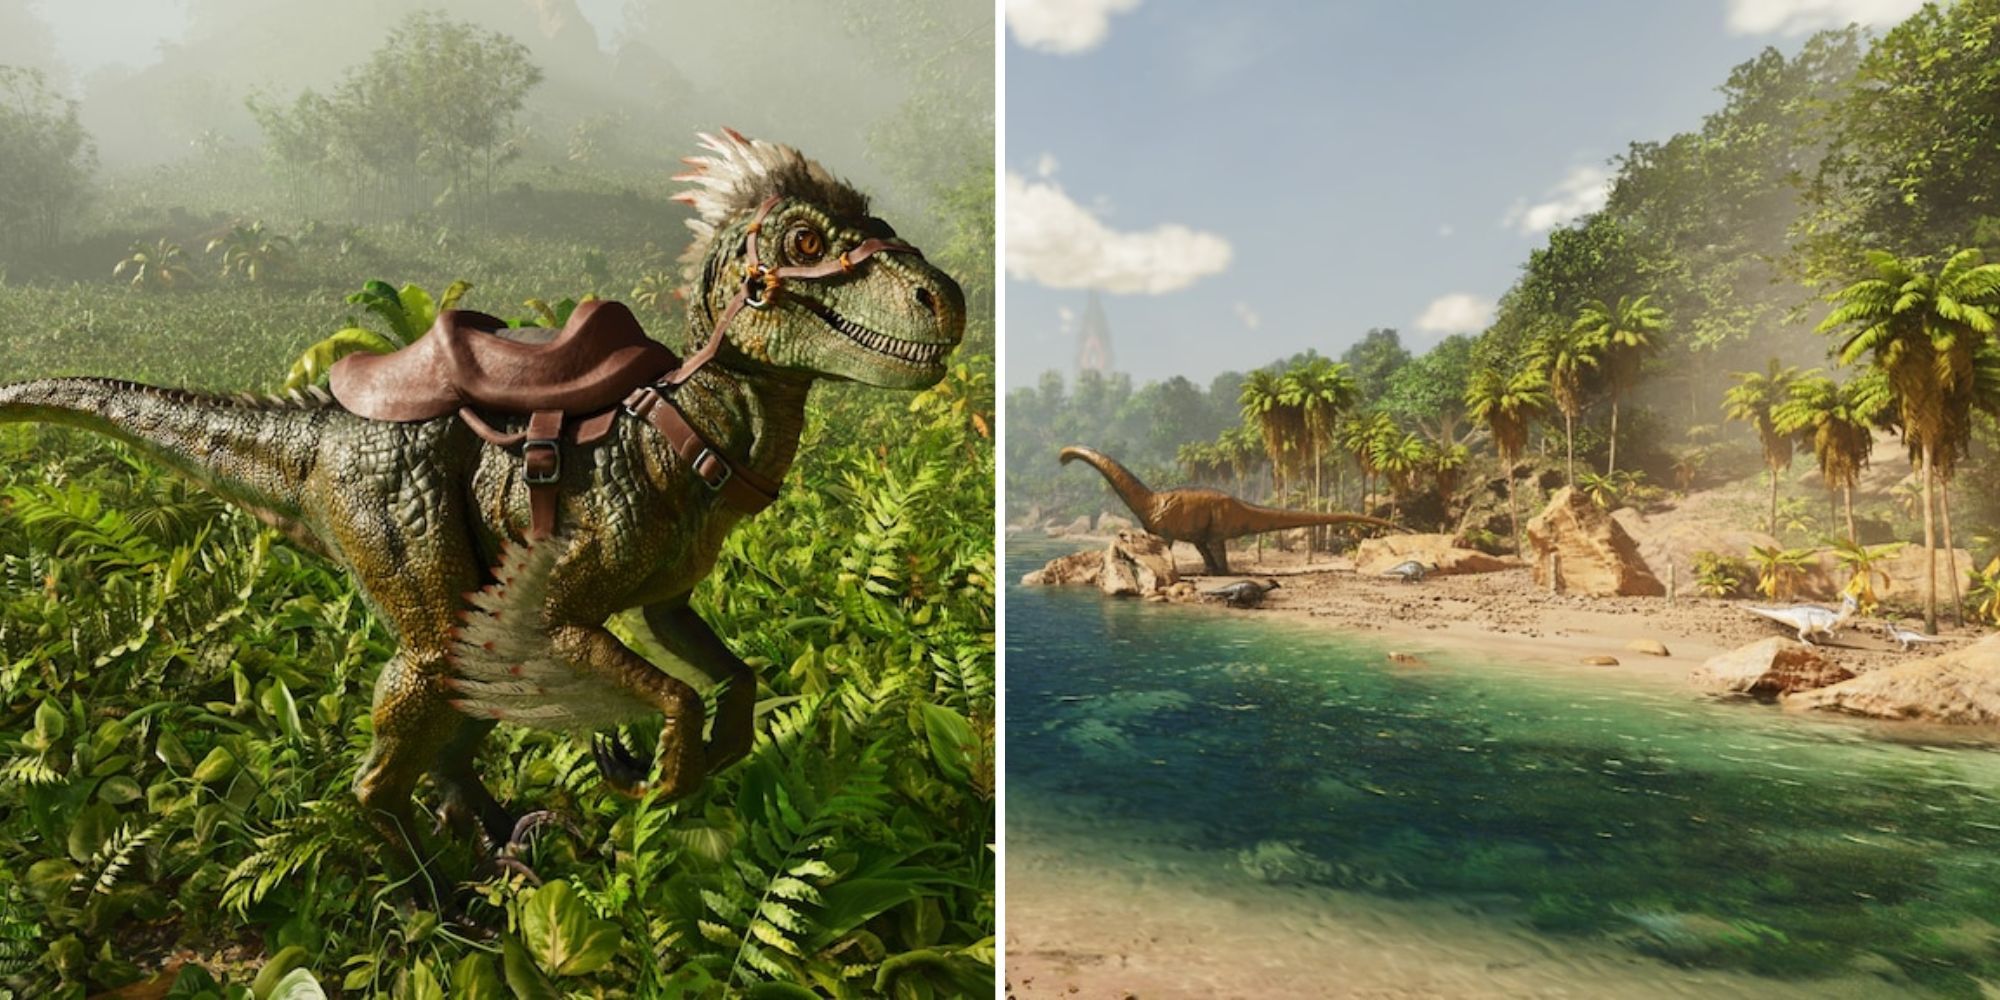 A split image of a dinosaur with a saddle in a dense, grassy area, and a river surrounded by sand, rocks, and foggy treelines.